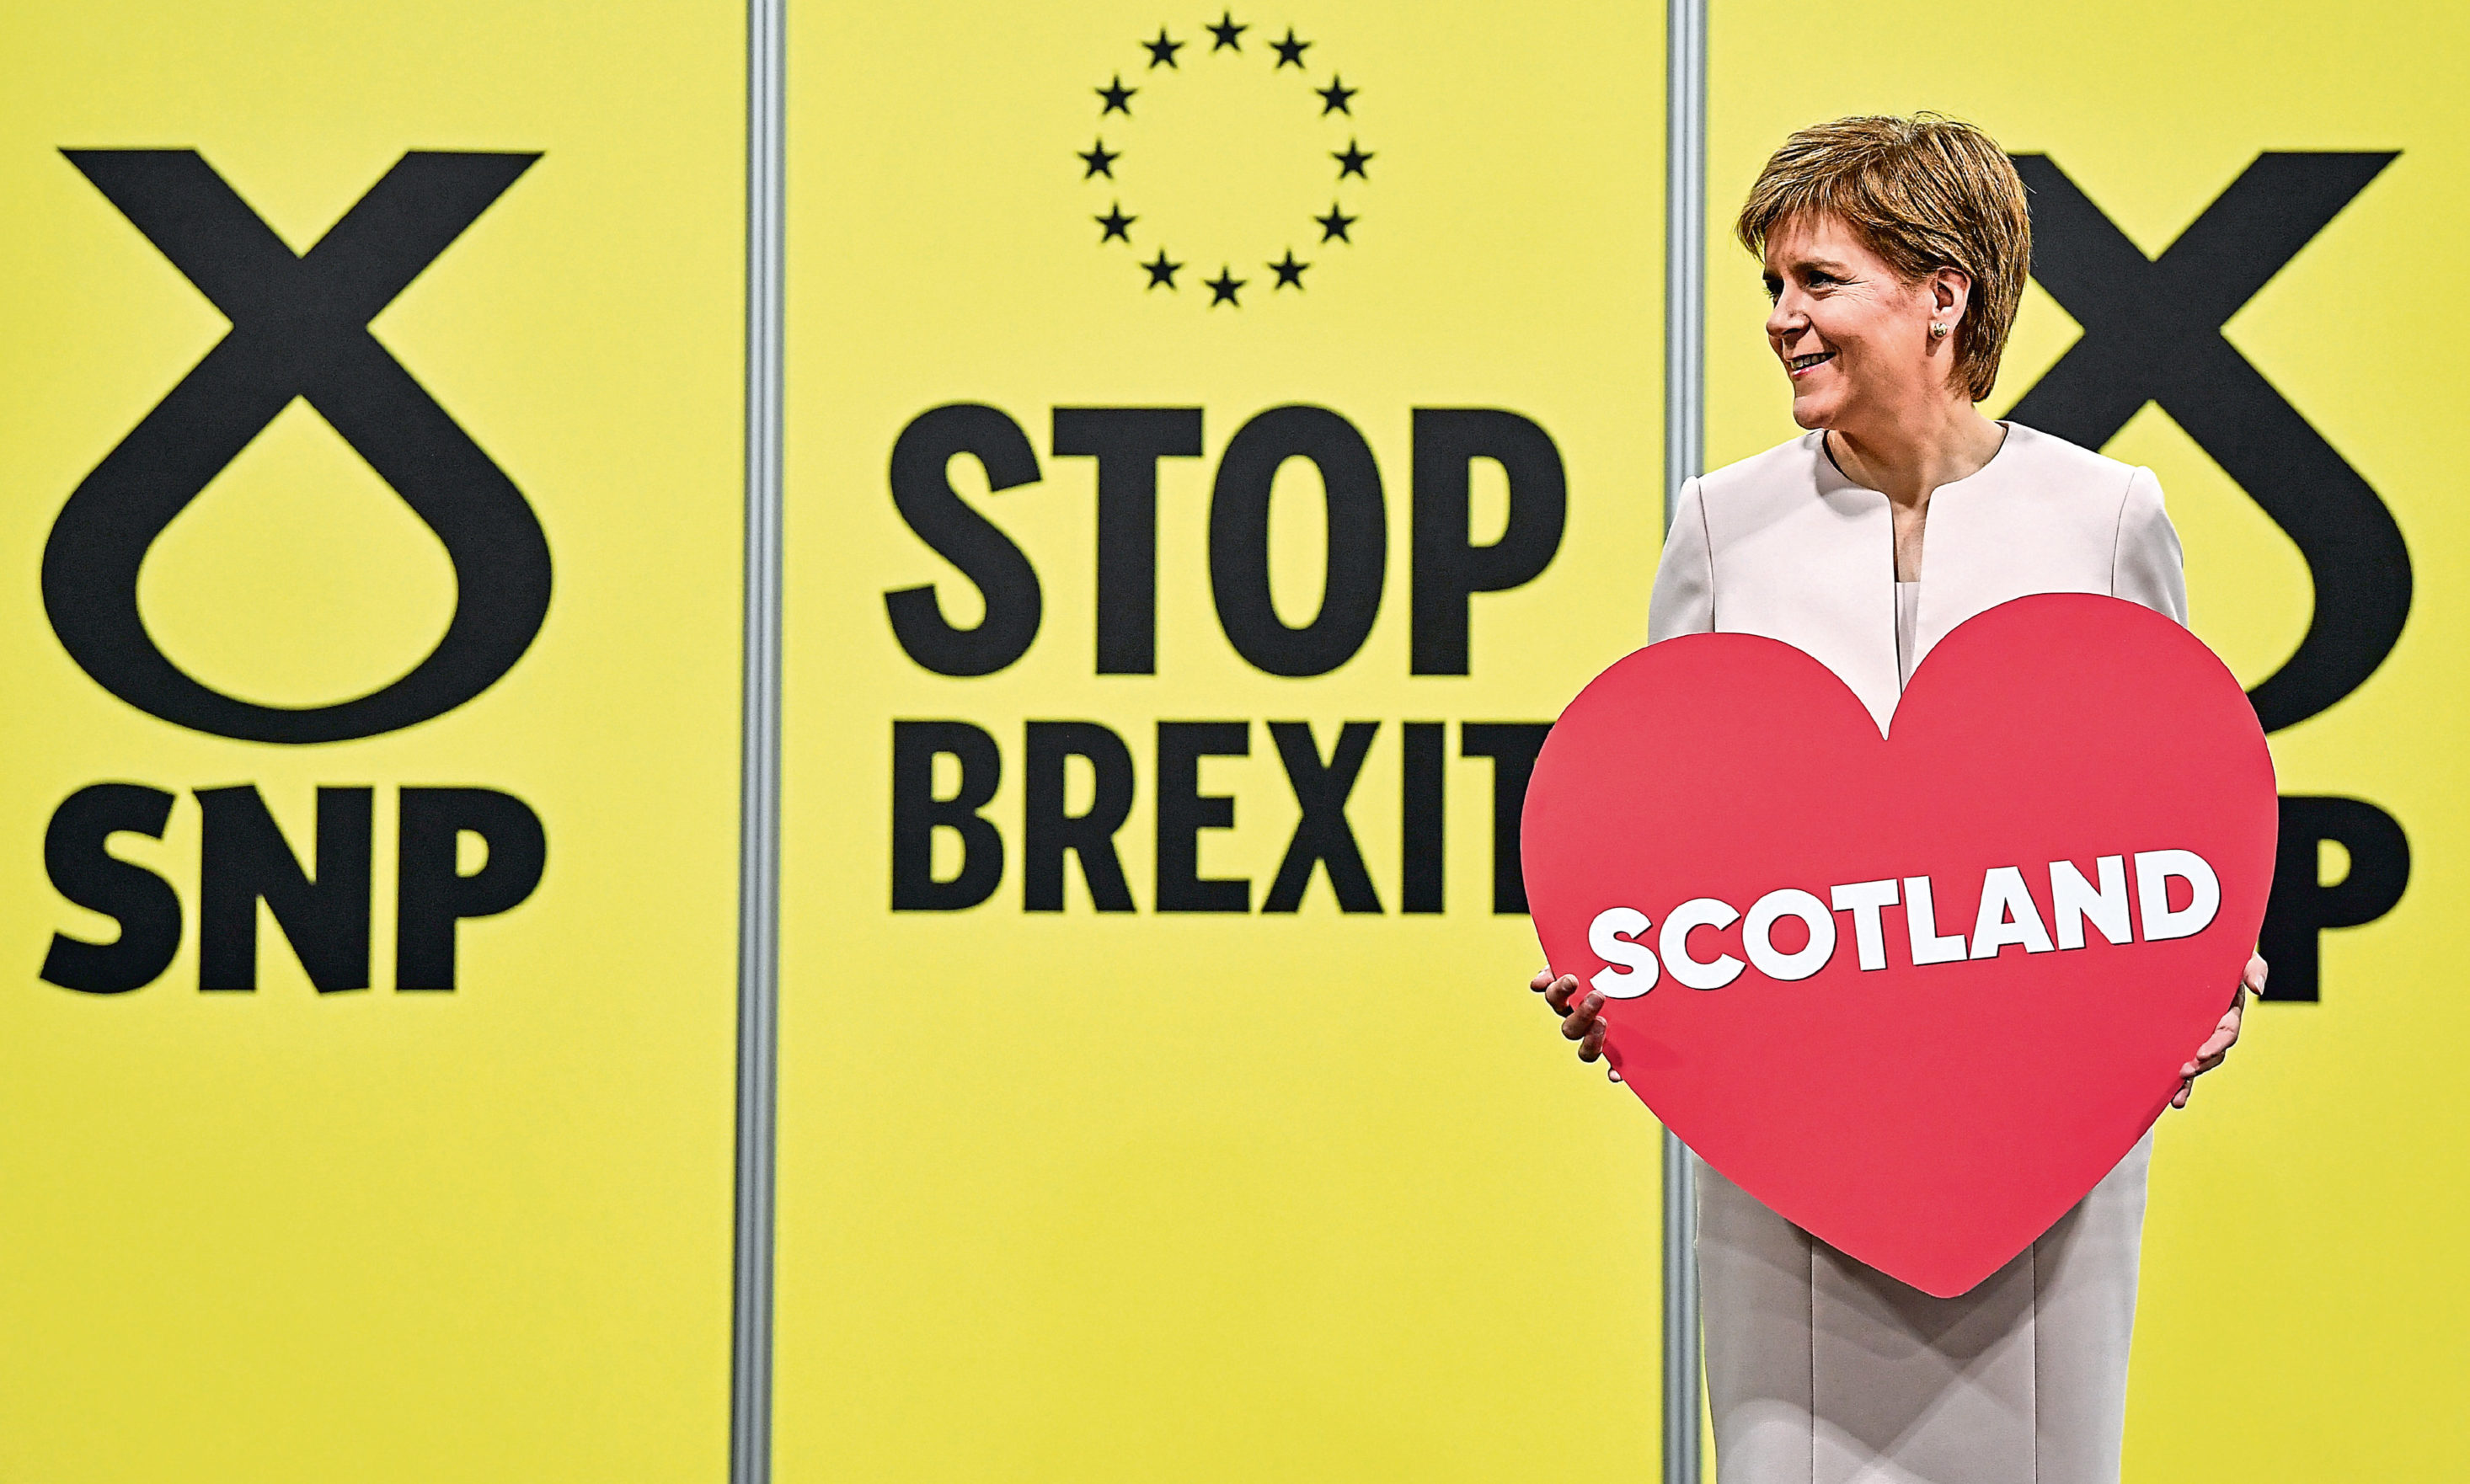 First Minister of Scotland and SNP leader Nicola Sturgeon holds a heart-shaped placard reading "Scotland" at the party autumn conference on October 14, 2019.